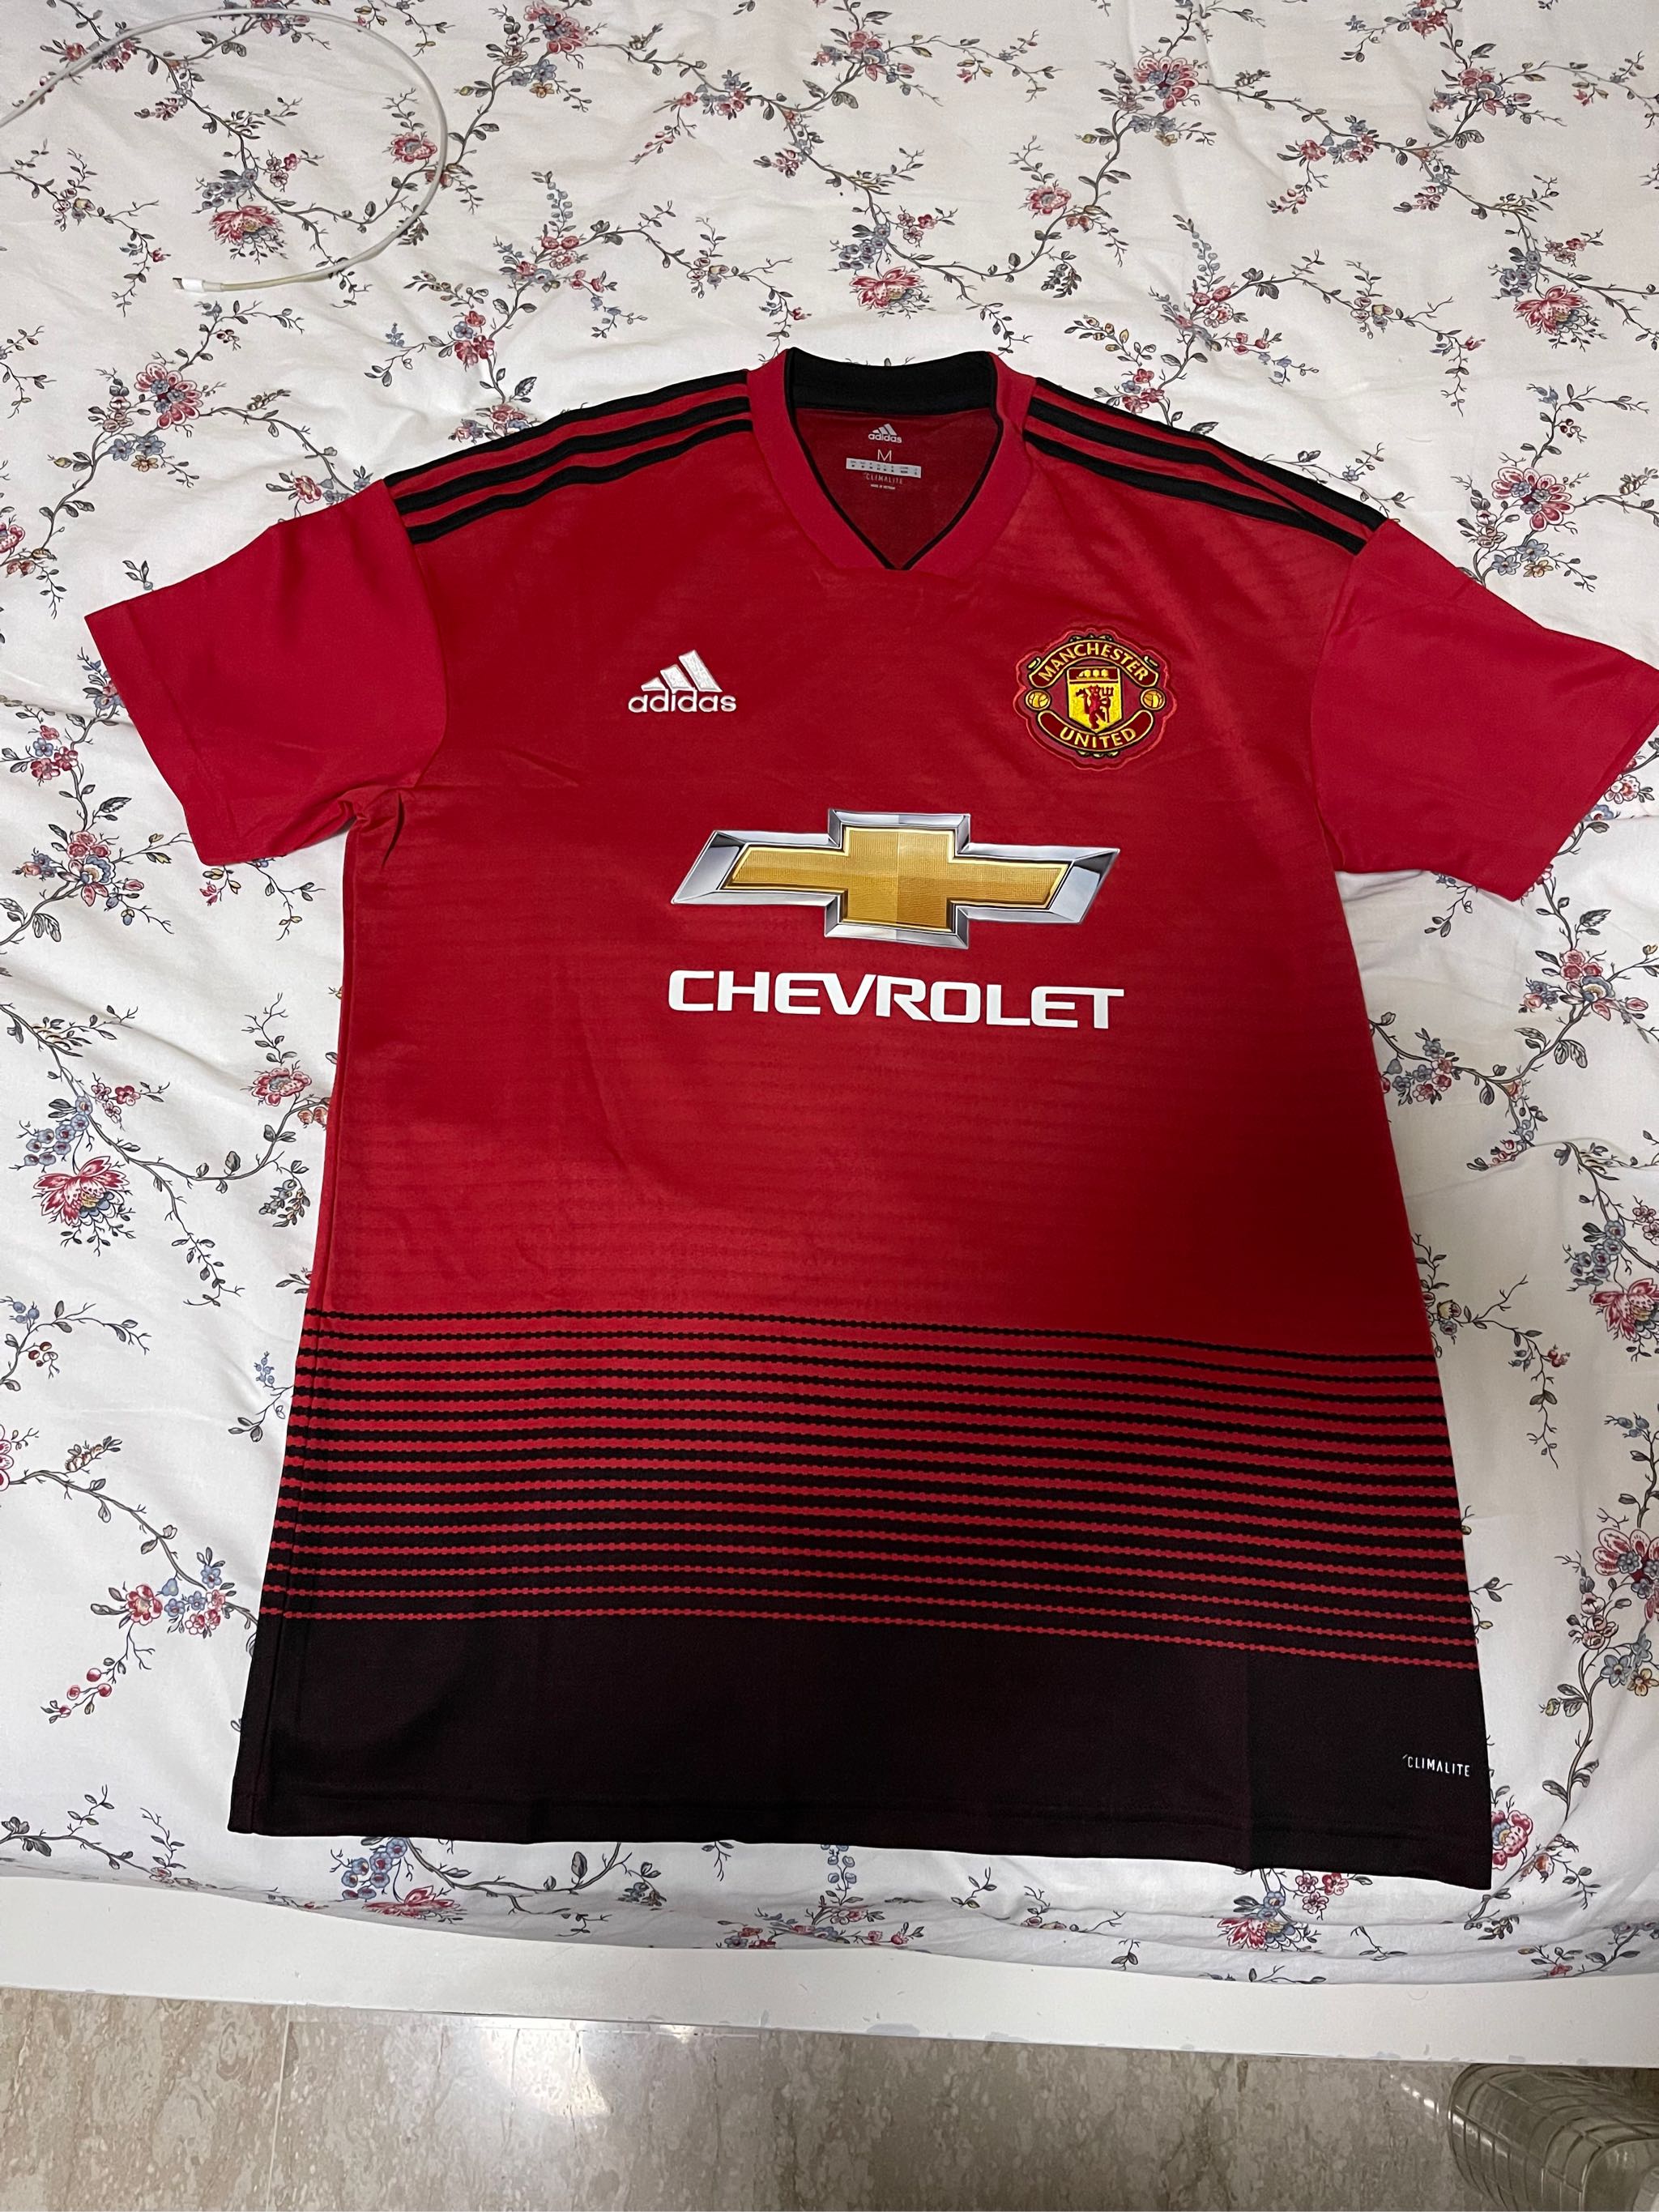 MANCHESTER UNITED ADIDAS 2018/2019 FOOTBALL HOME JERSEY SIZE “XL” CG0040  SOCCER